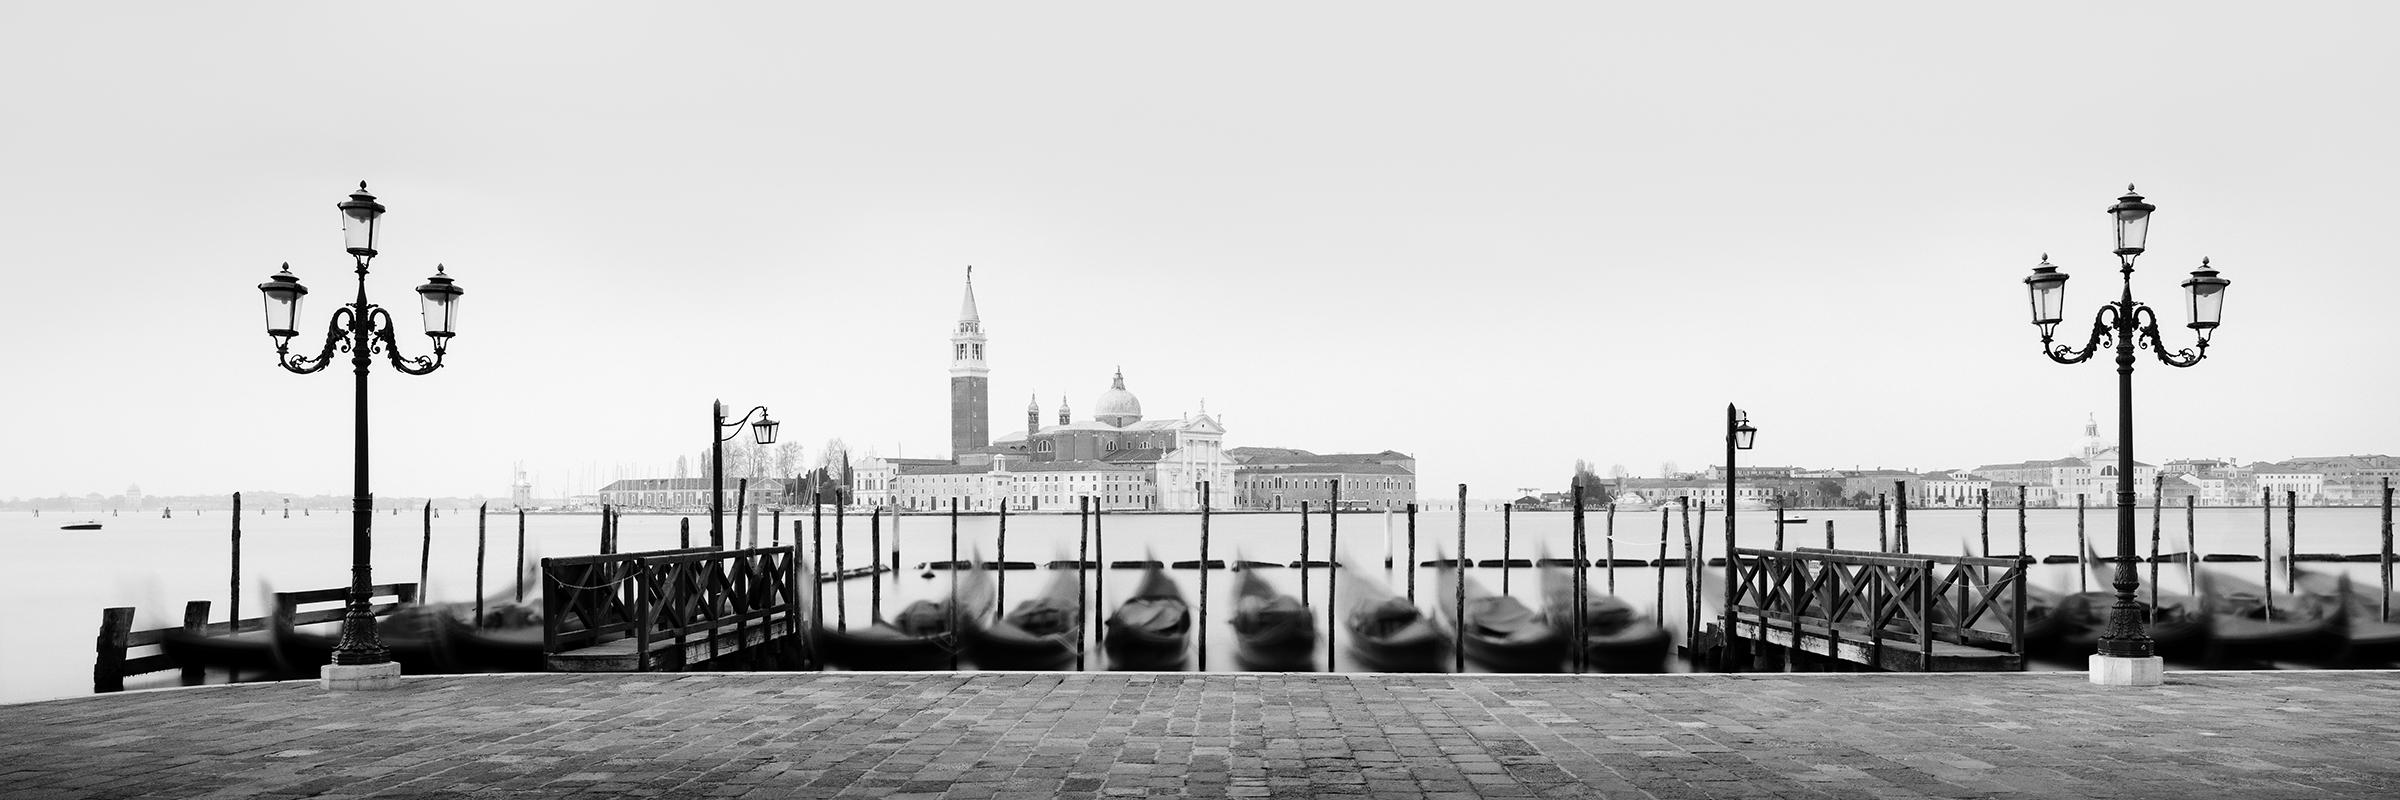 Gerald Berghammer Landscape Photograph - Between the Lights, Venice, black and white panorama art cityscape photography